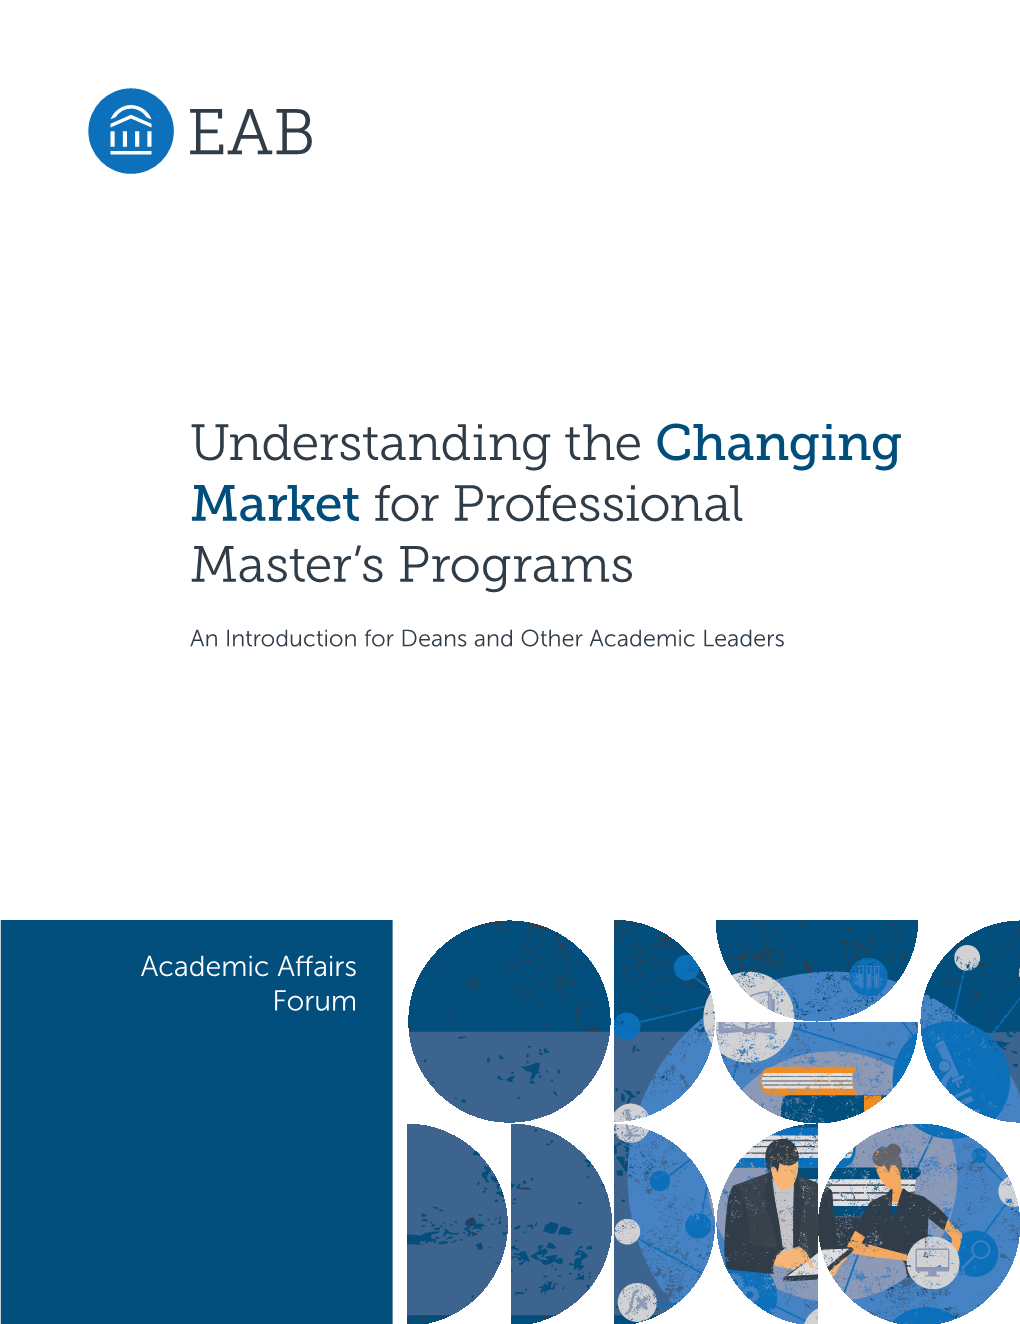 Understanding the Changing Market for Professional Master's Programs